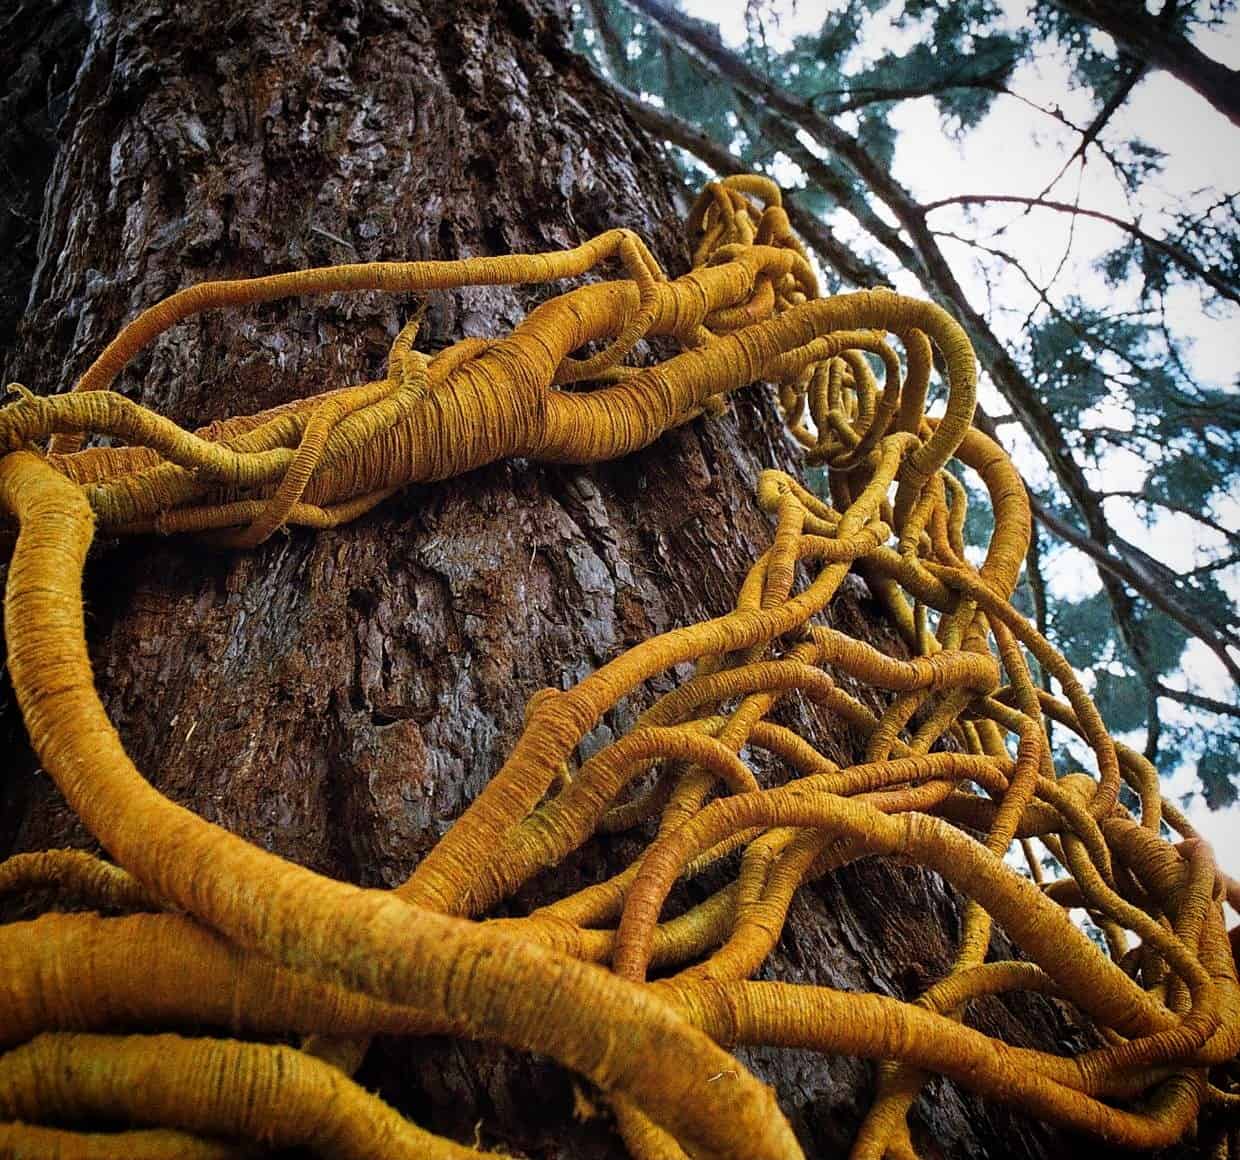 Picture of a sequoia tree wrapped in a large yellow sculpture by Aude Franjou